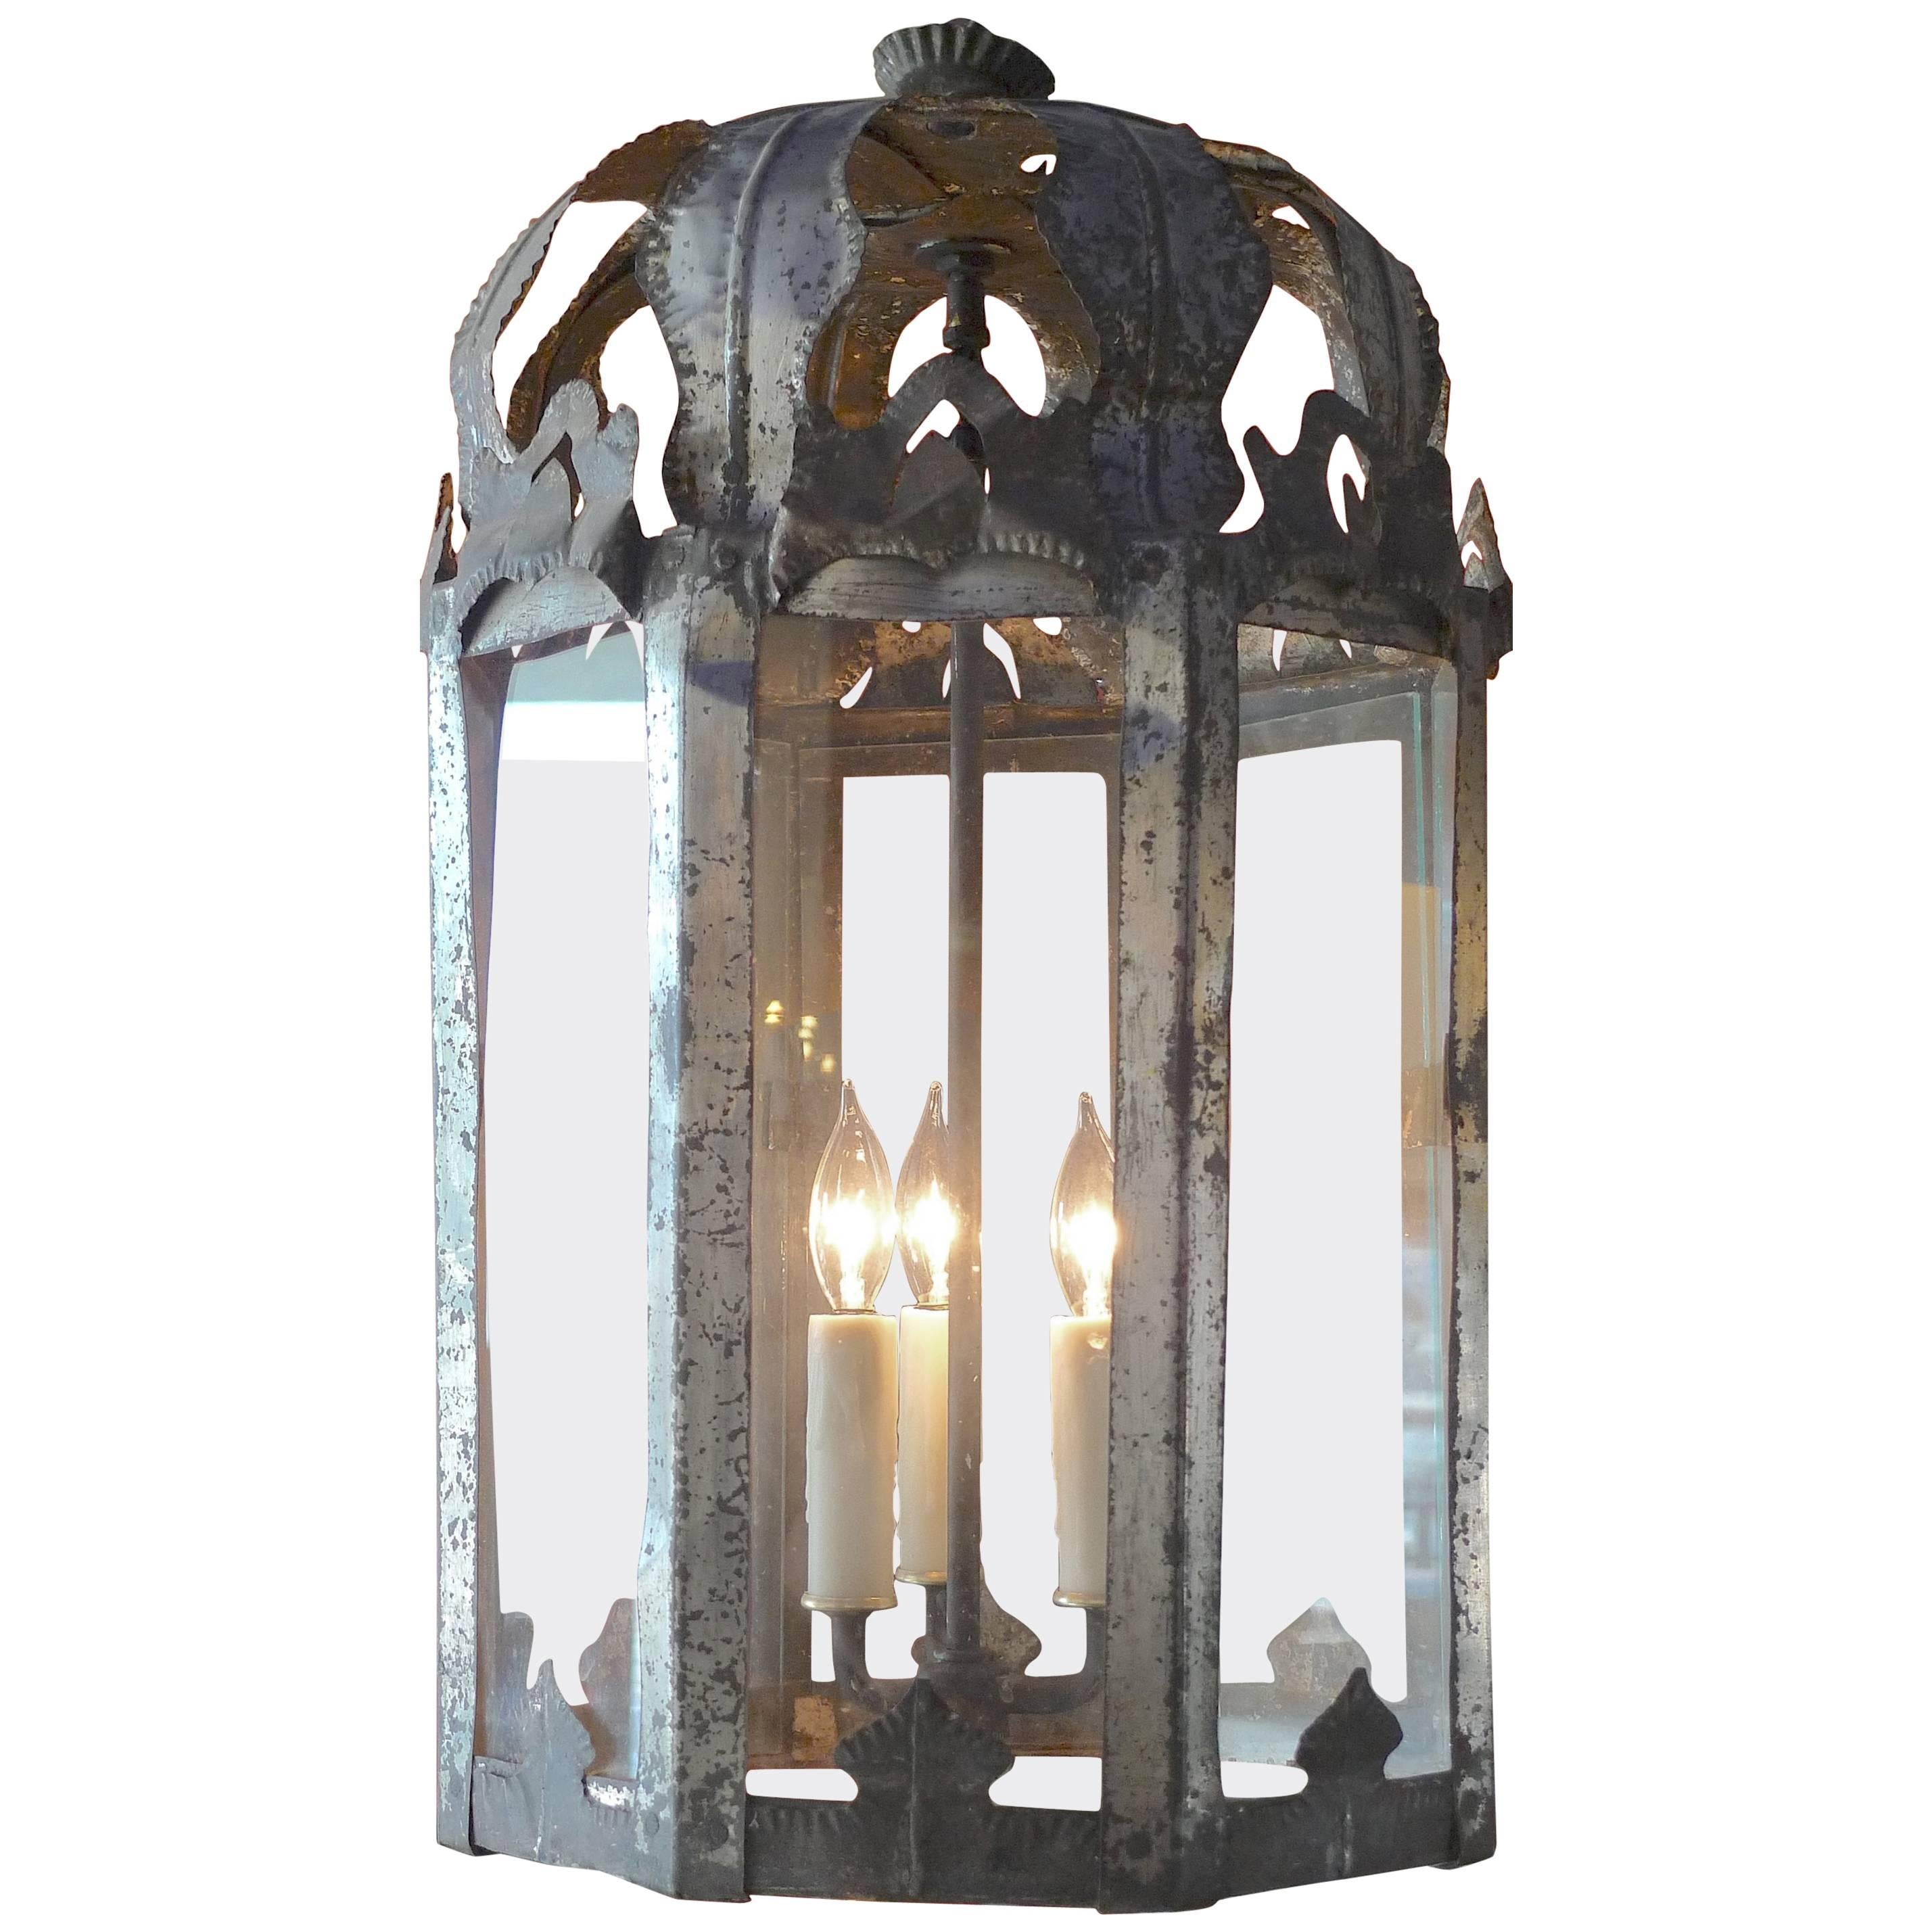 French 19th Century Iron and Glass Eight-Sided Three-Light Lantern